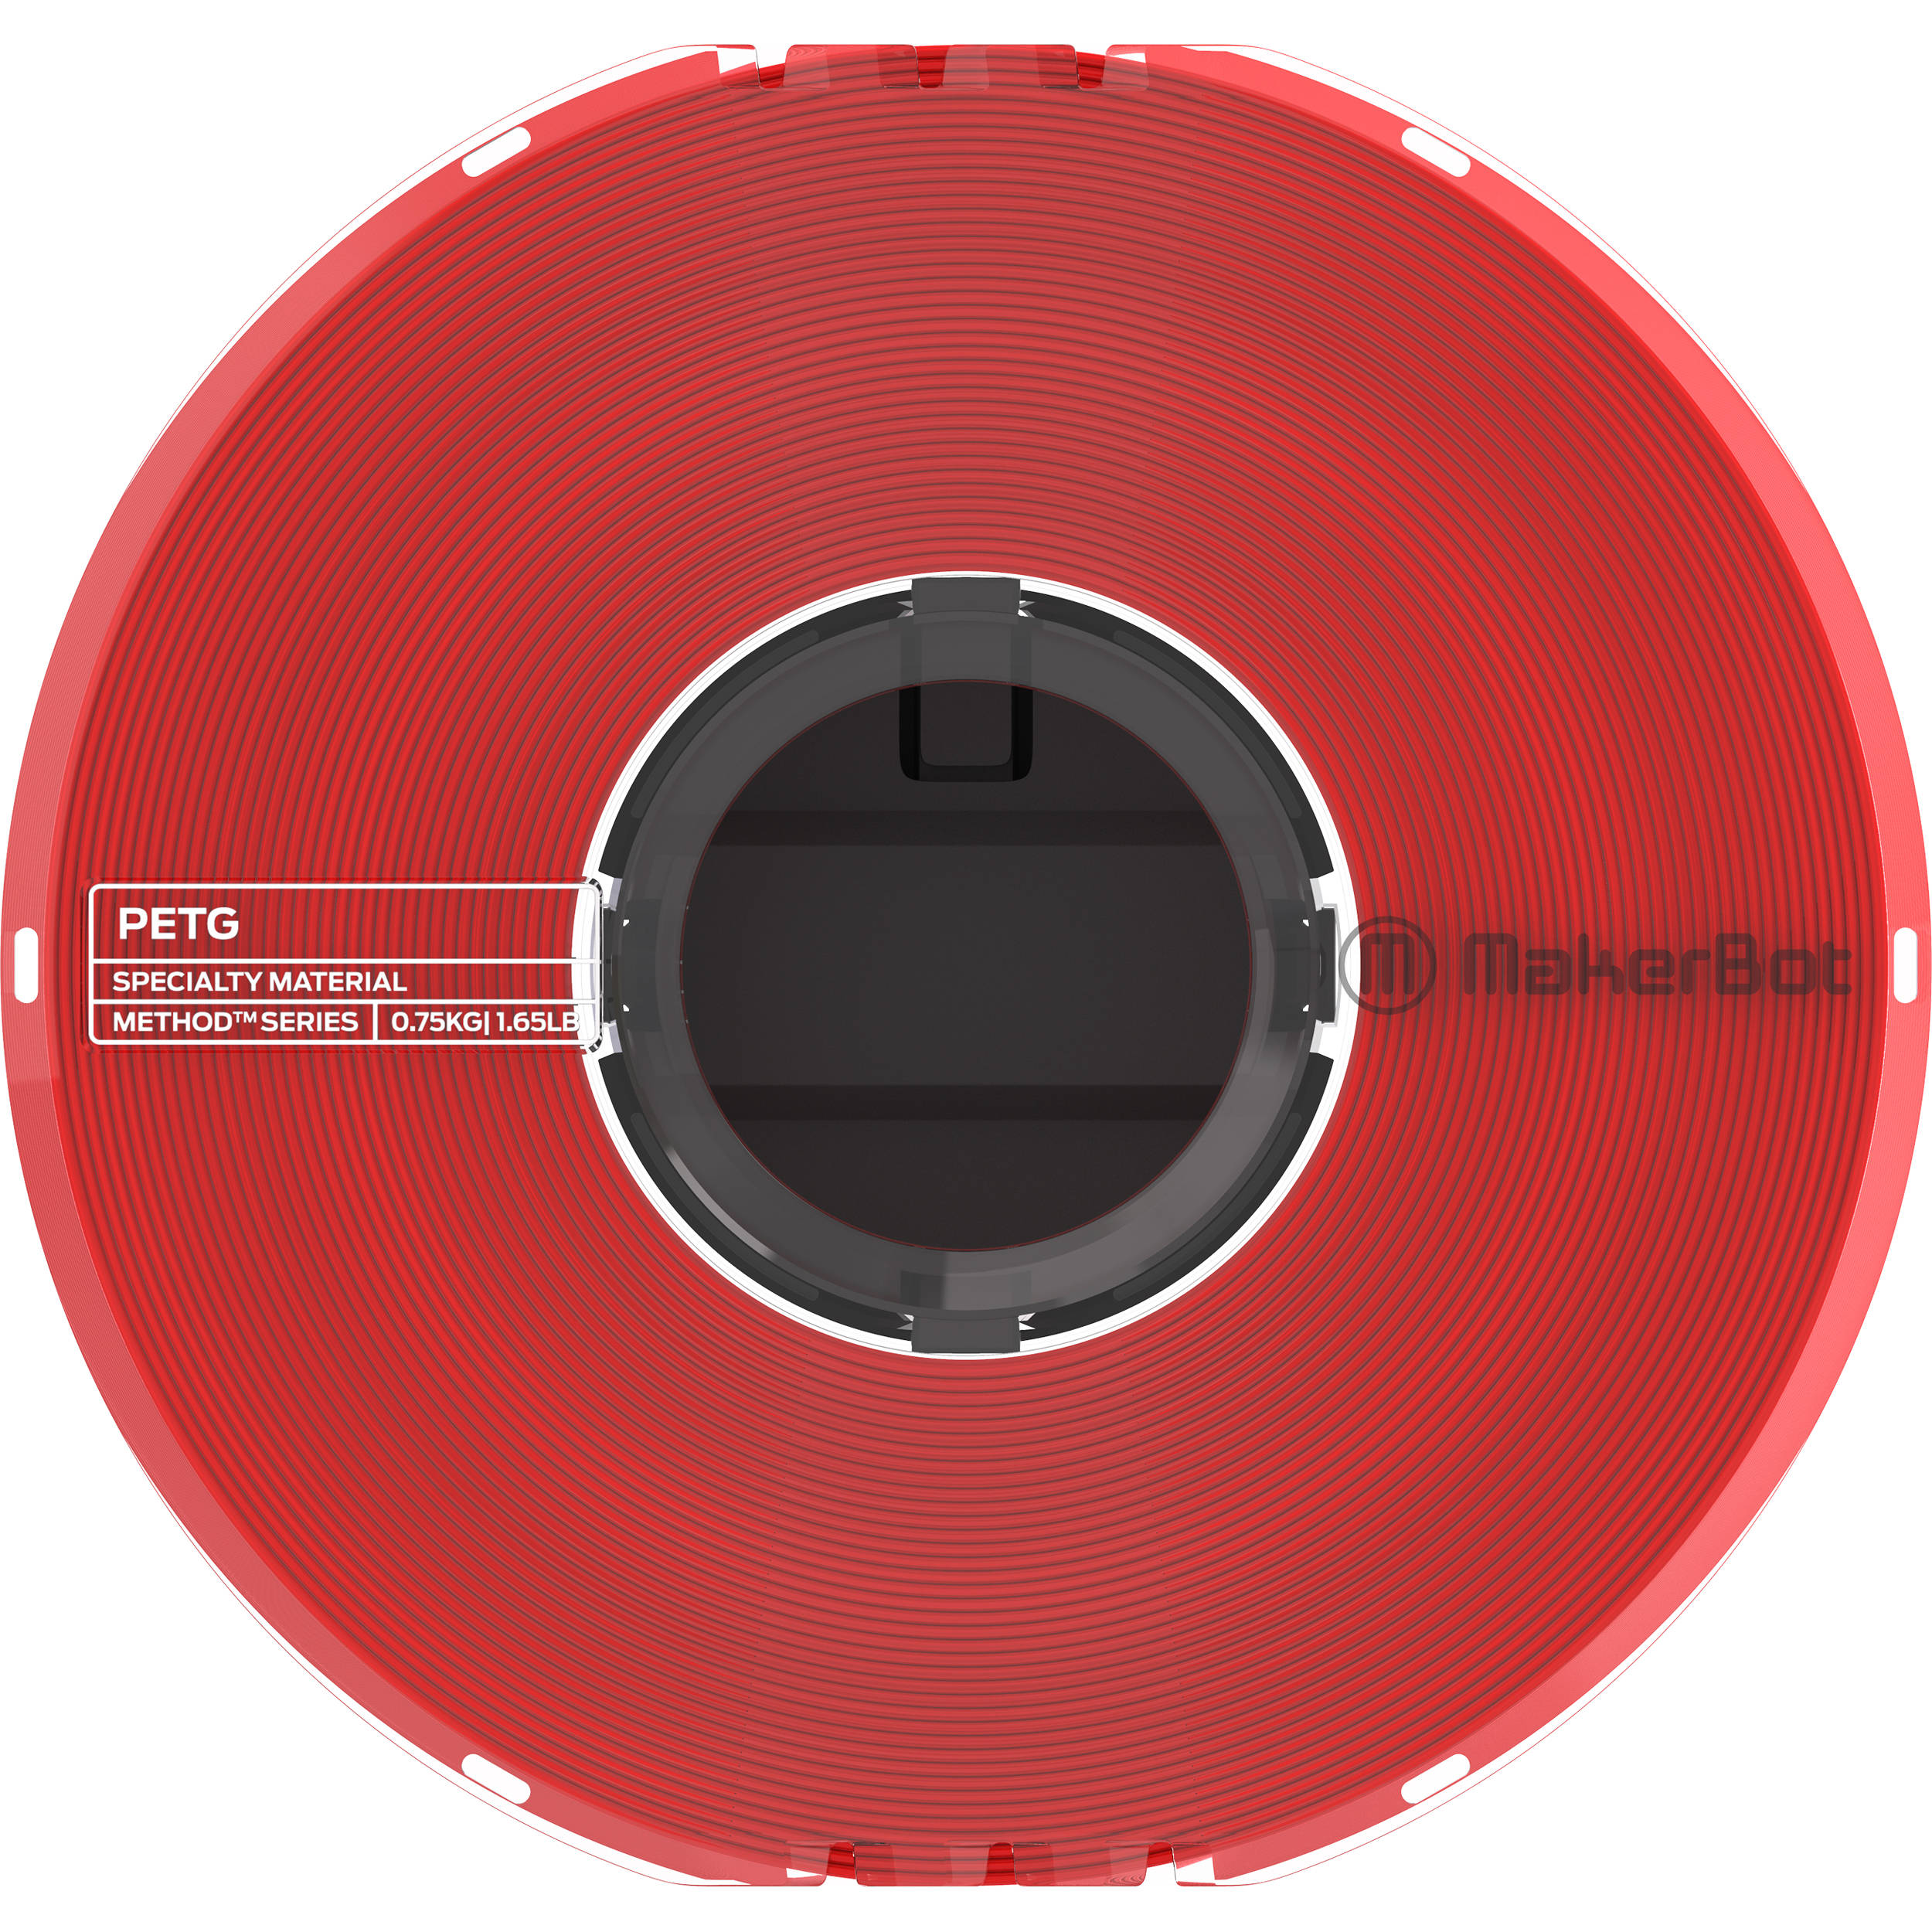 MakerBot 1.75mm PETG Specialty Filament (Red)